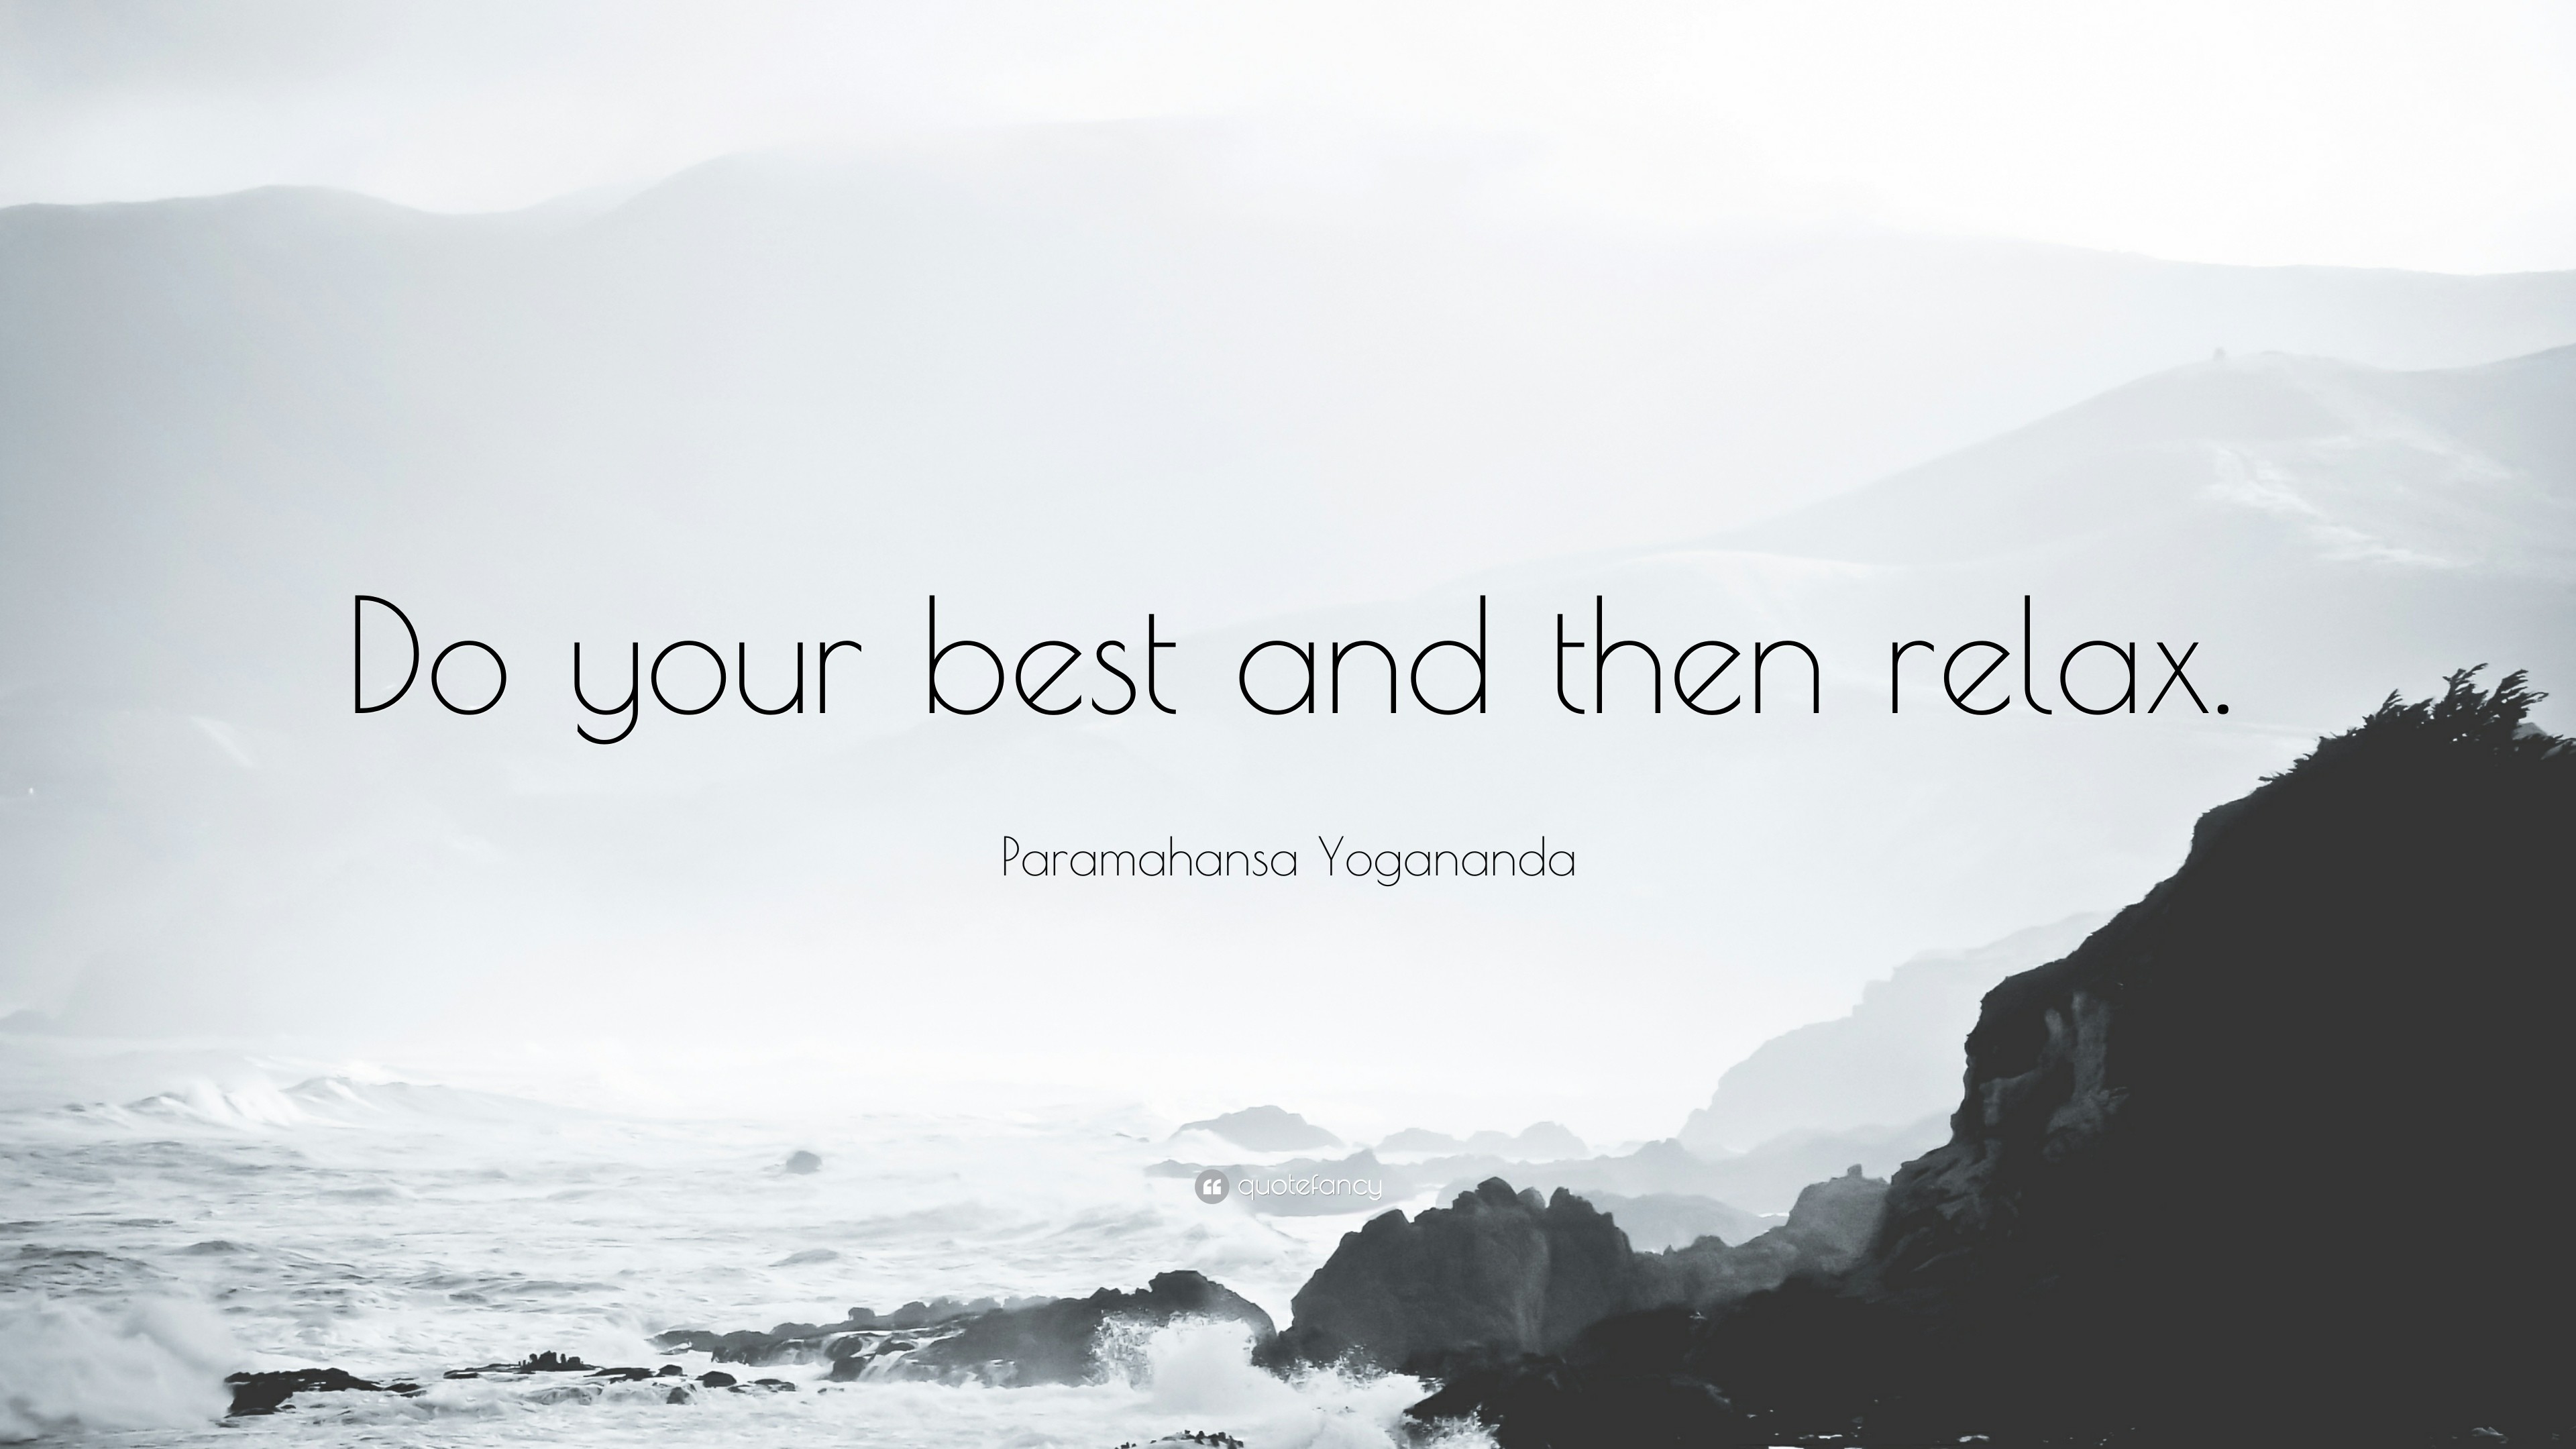 3840x2160 Paramahansa Yogananda Quote: “Do your best and then relax.”